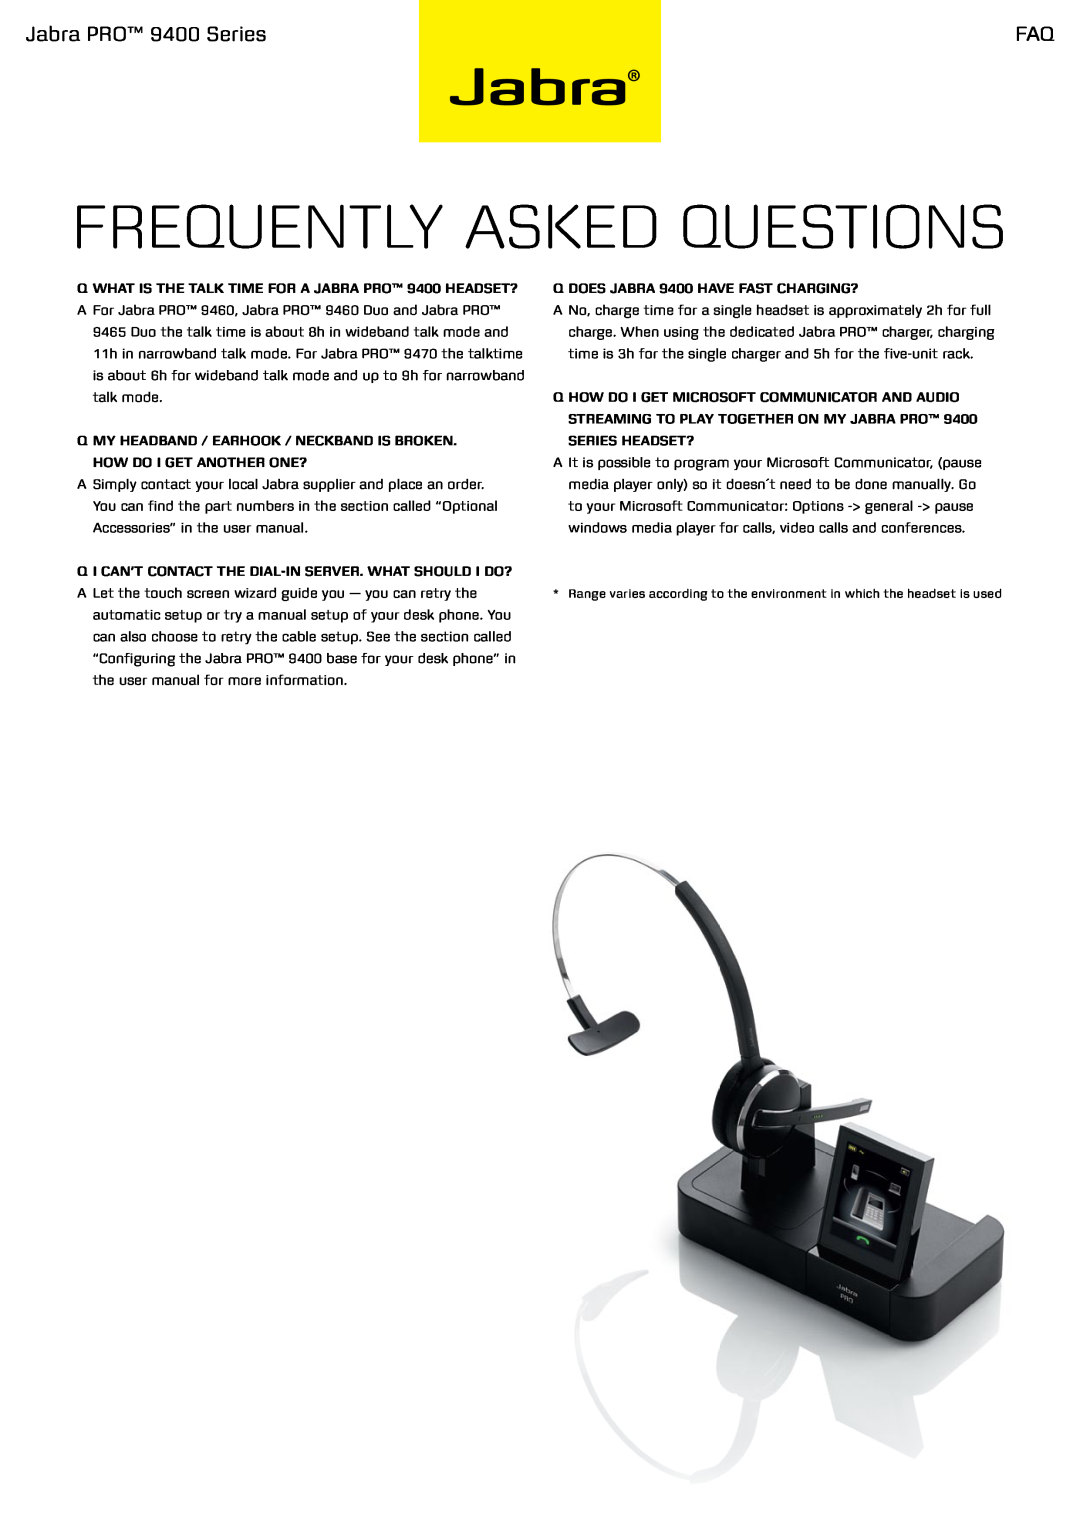 Jabra user manual Frequently asked questions, Jabra PRO 9400 Series, Q does Jabra 9400 Have fast cHargIng? 